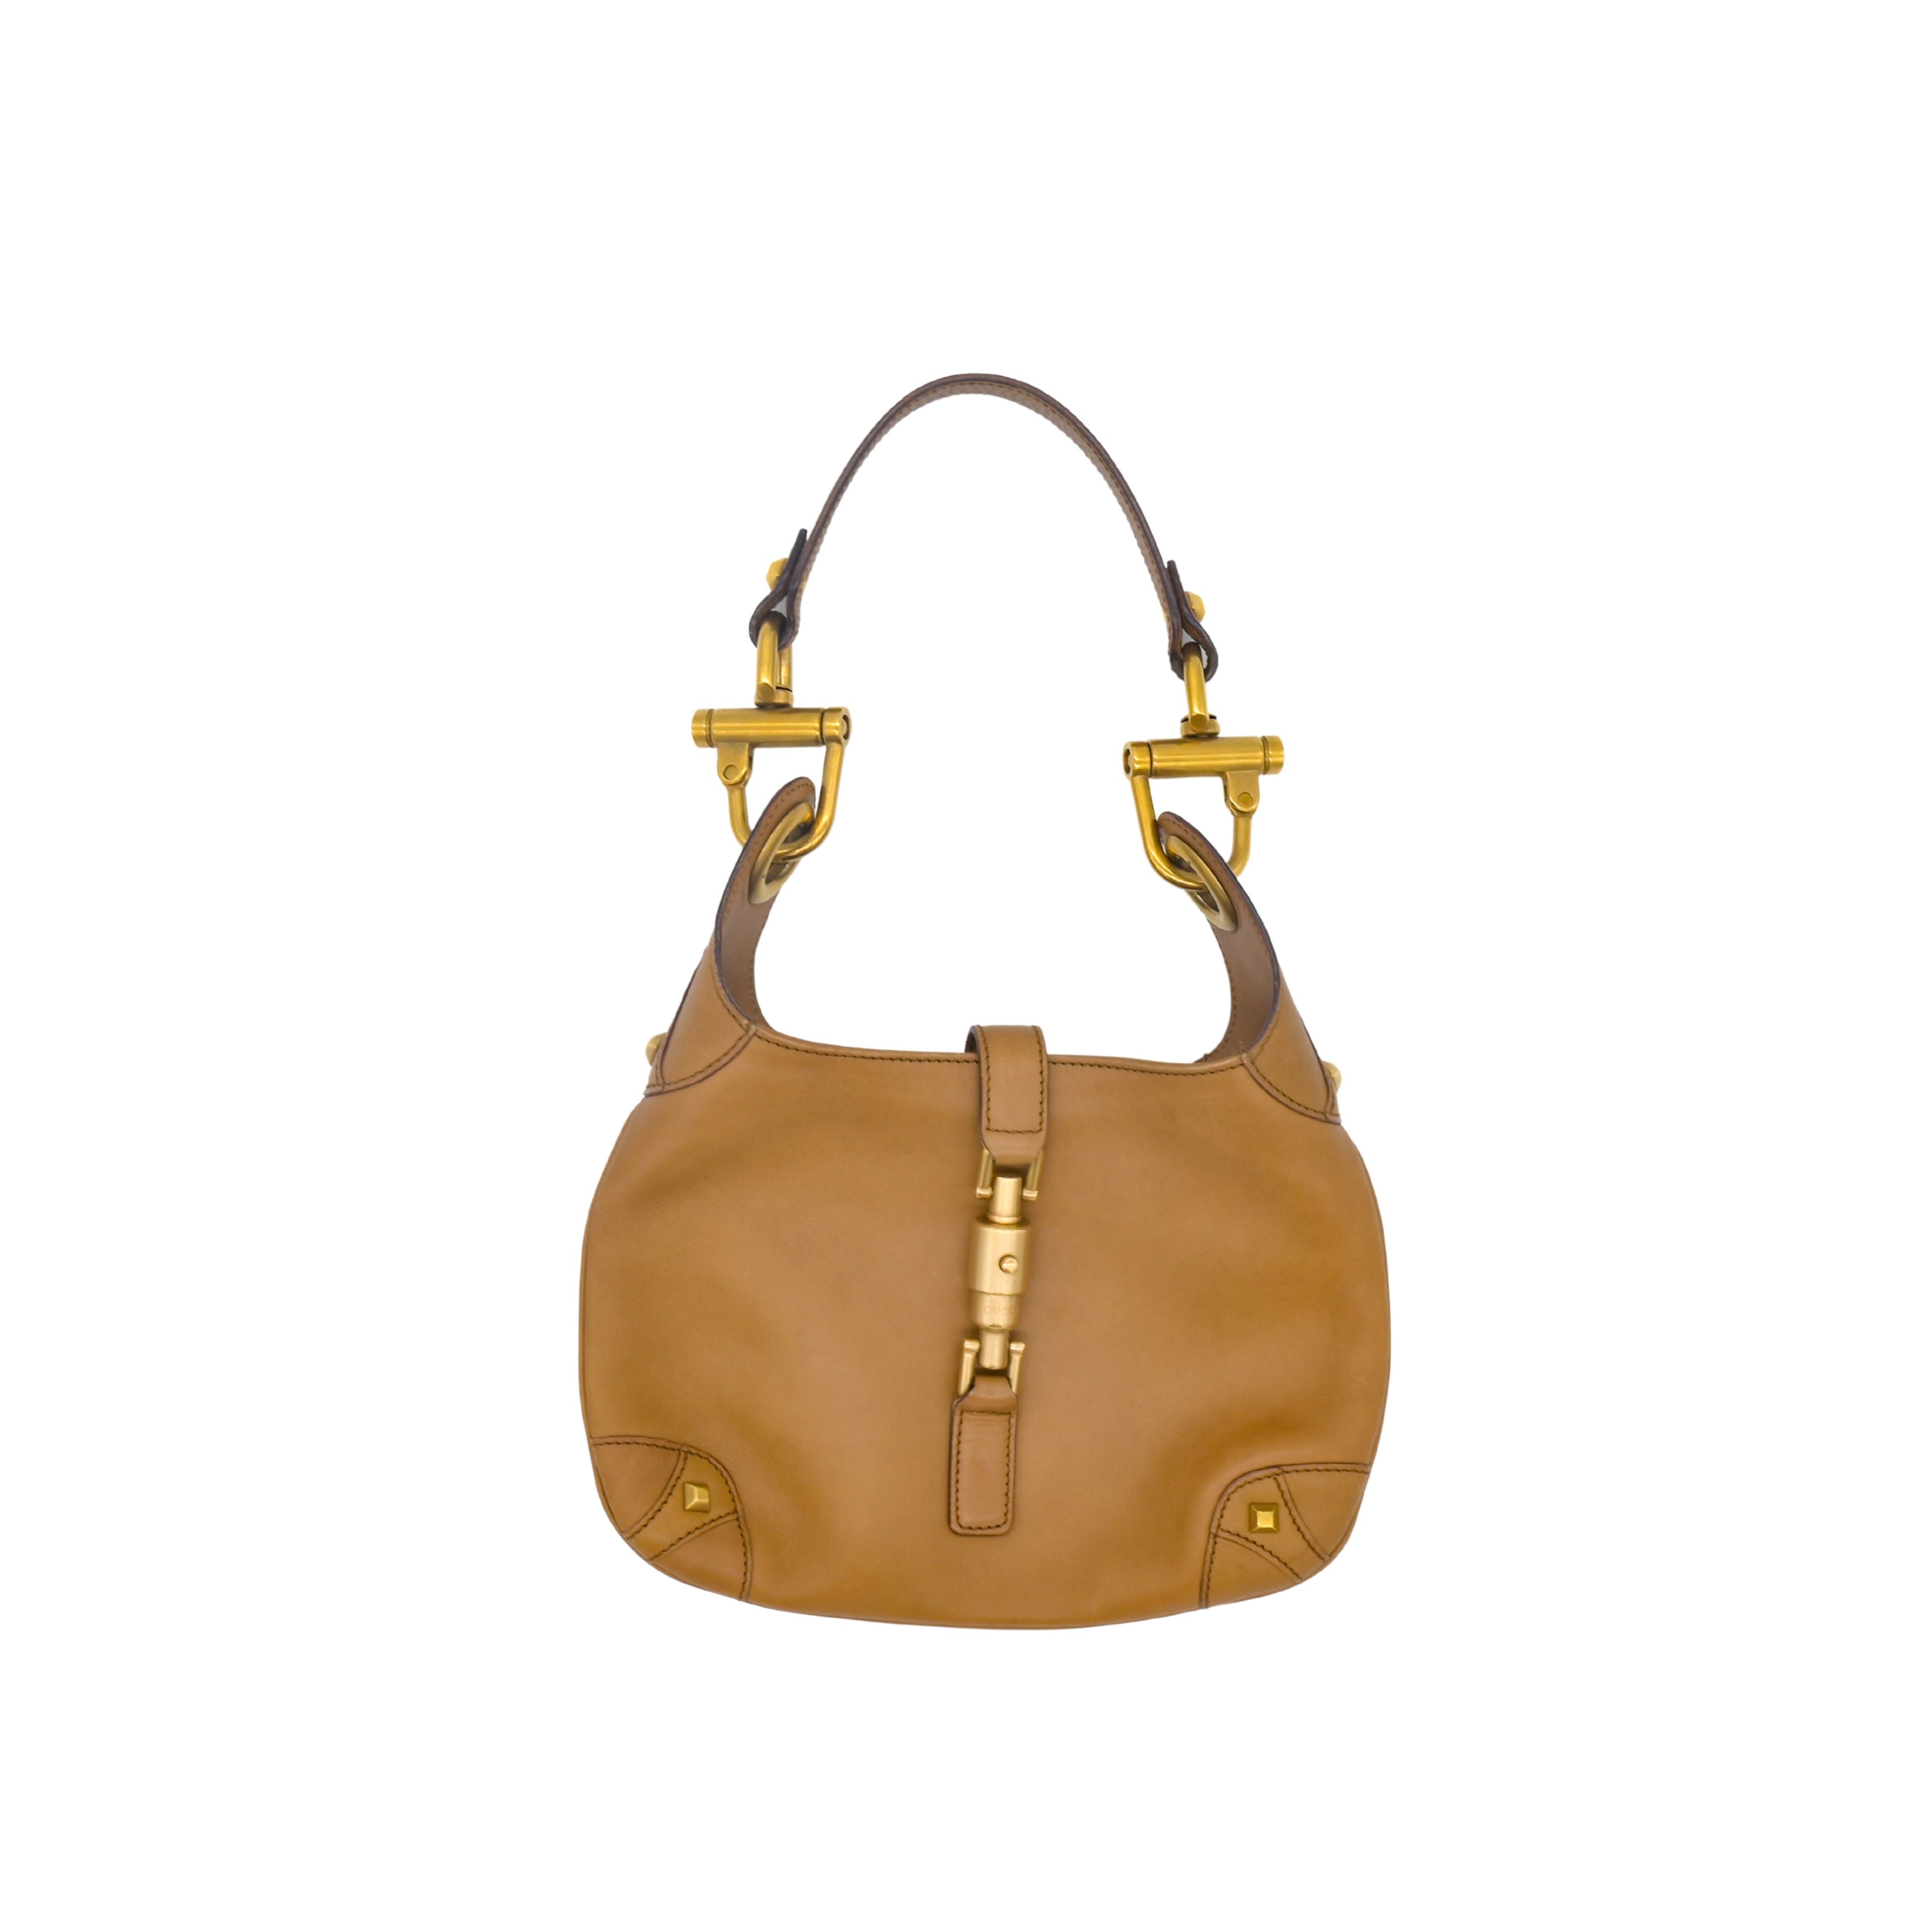 GUCCI Gucci Jackie Vintage Mini Hobo in Cognac Brown Leather (was $848) - Vault 55